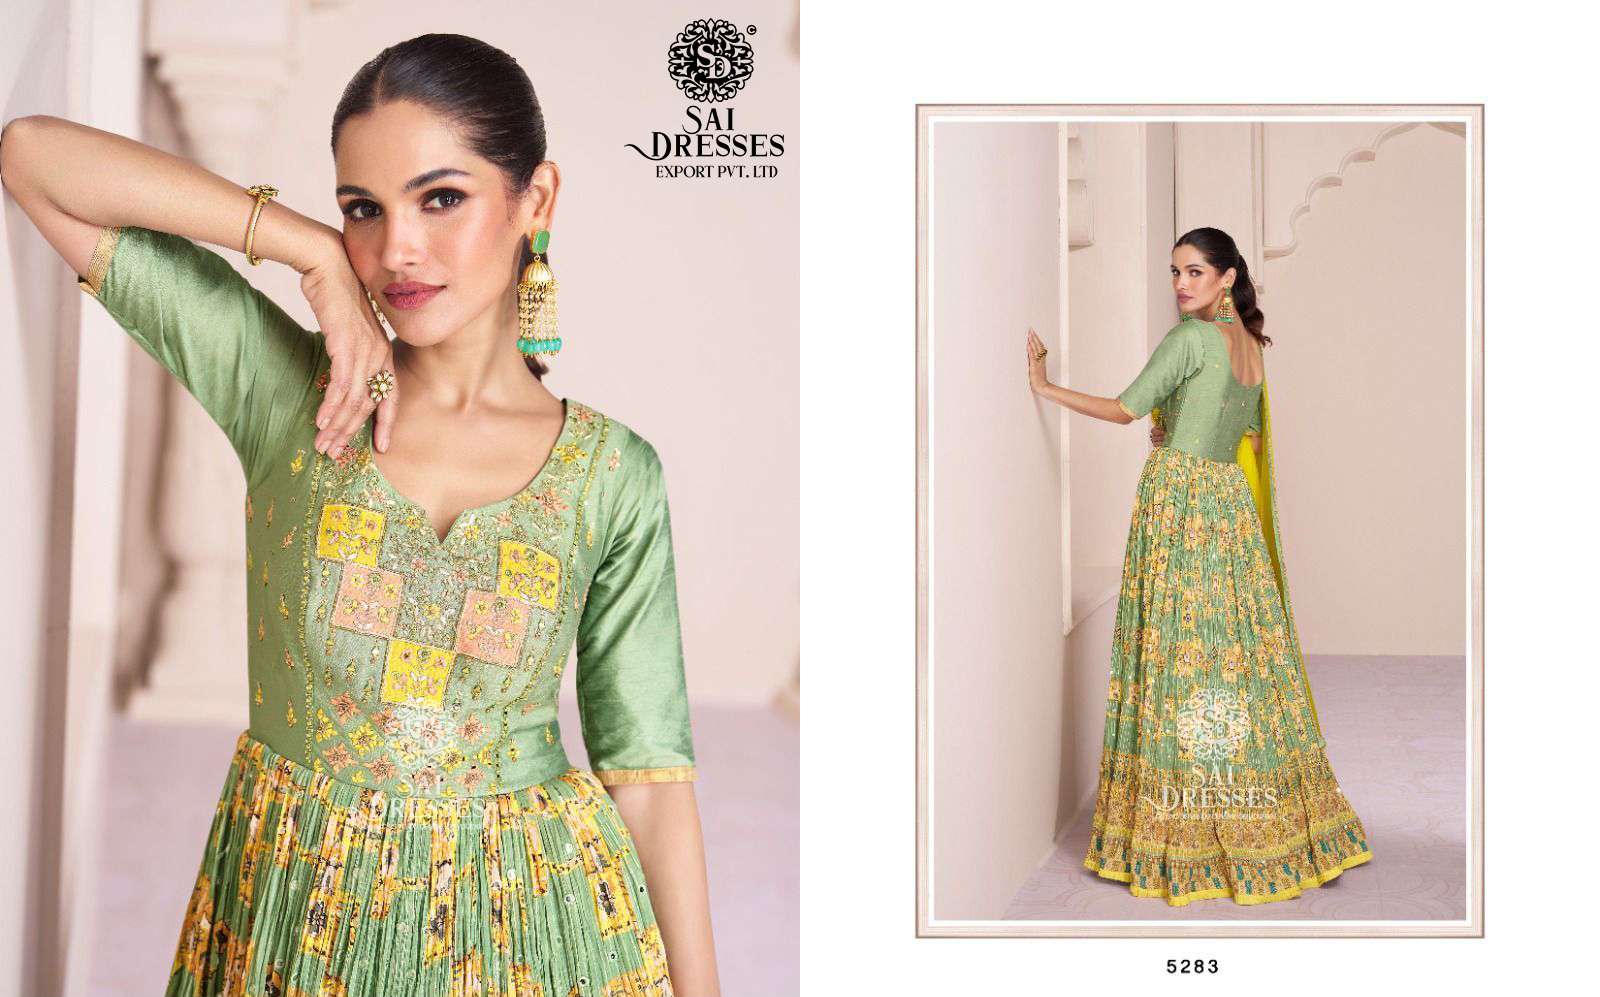 SAI DRESSES PRESENT VARTIKA READYMADE CLASSY WEAR DESIGNER LONG GOWN WITH DUPATTA IN WHOLESALE RATE IN SURAT